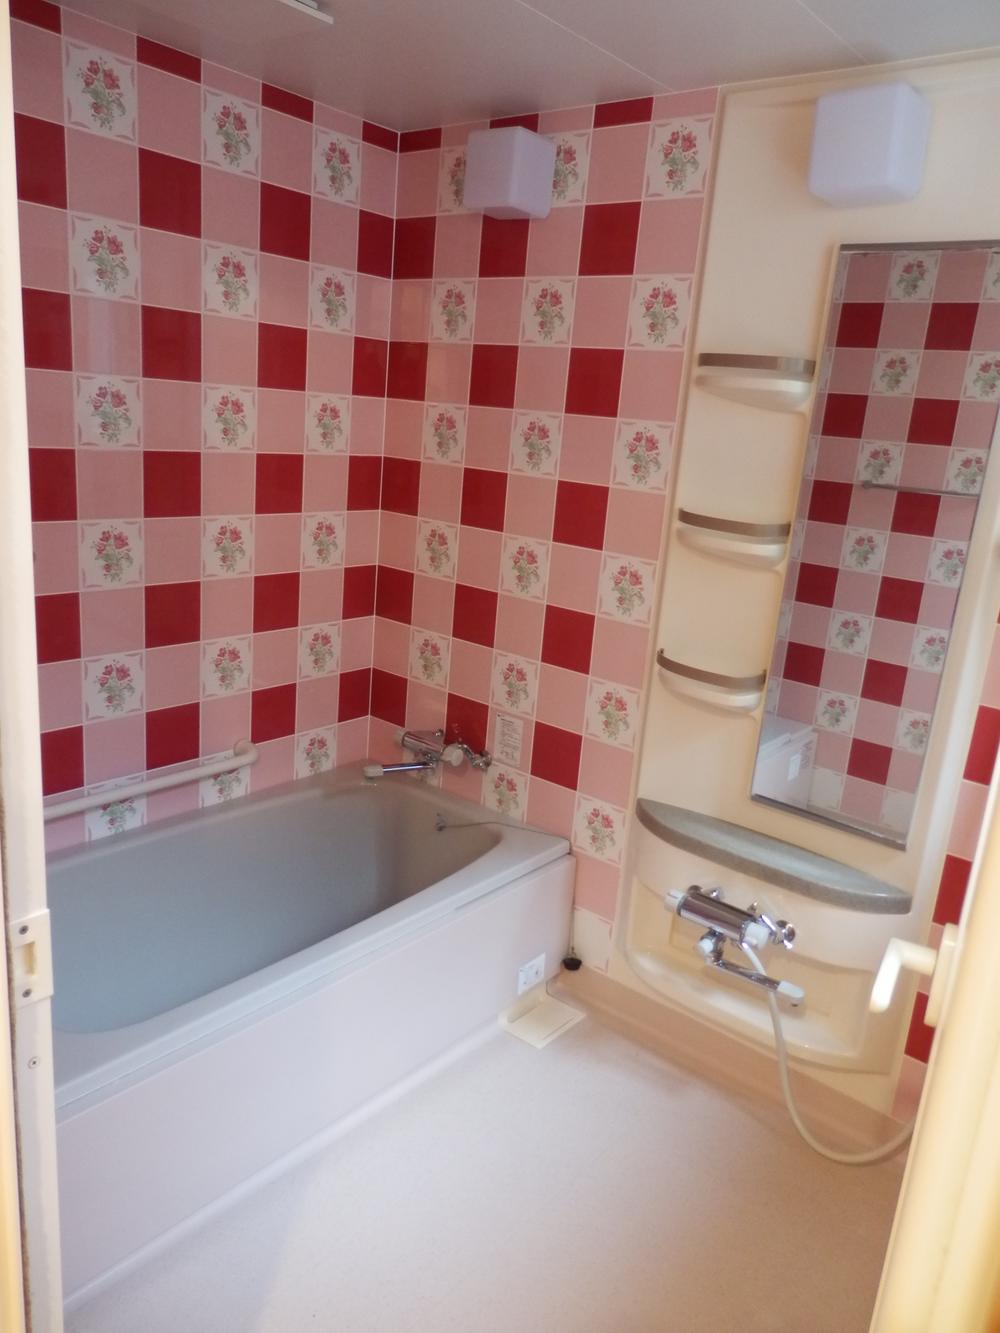 Bathroom. It is the unit bus of 1.25 square meters with window. 